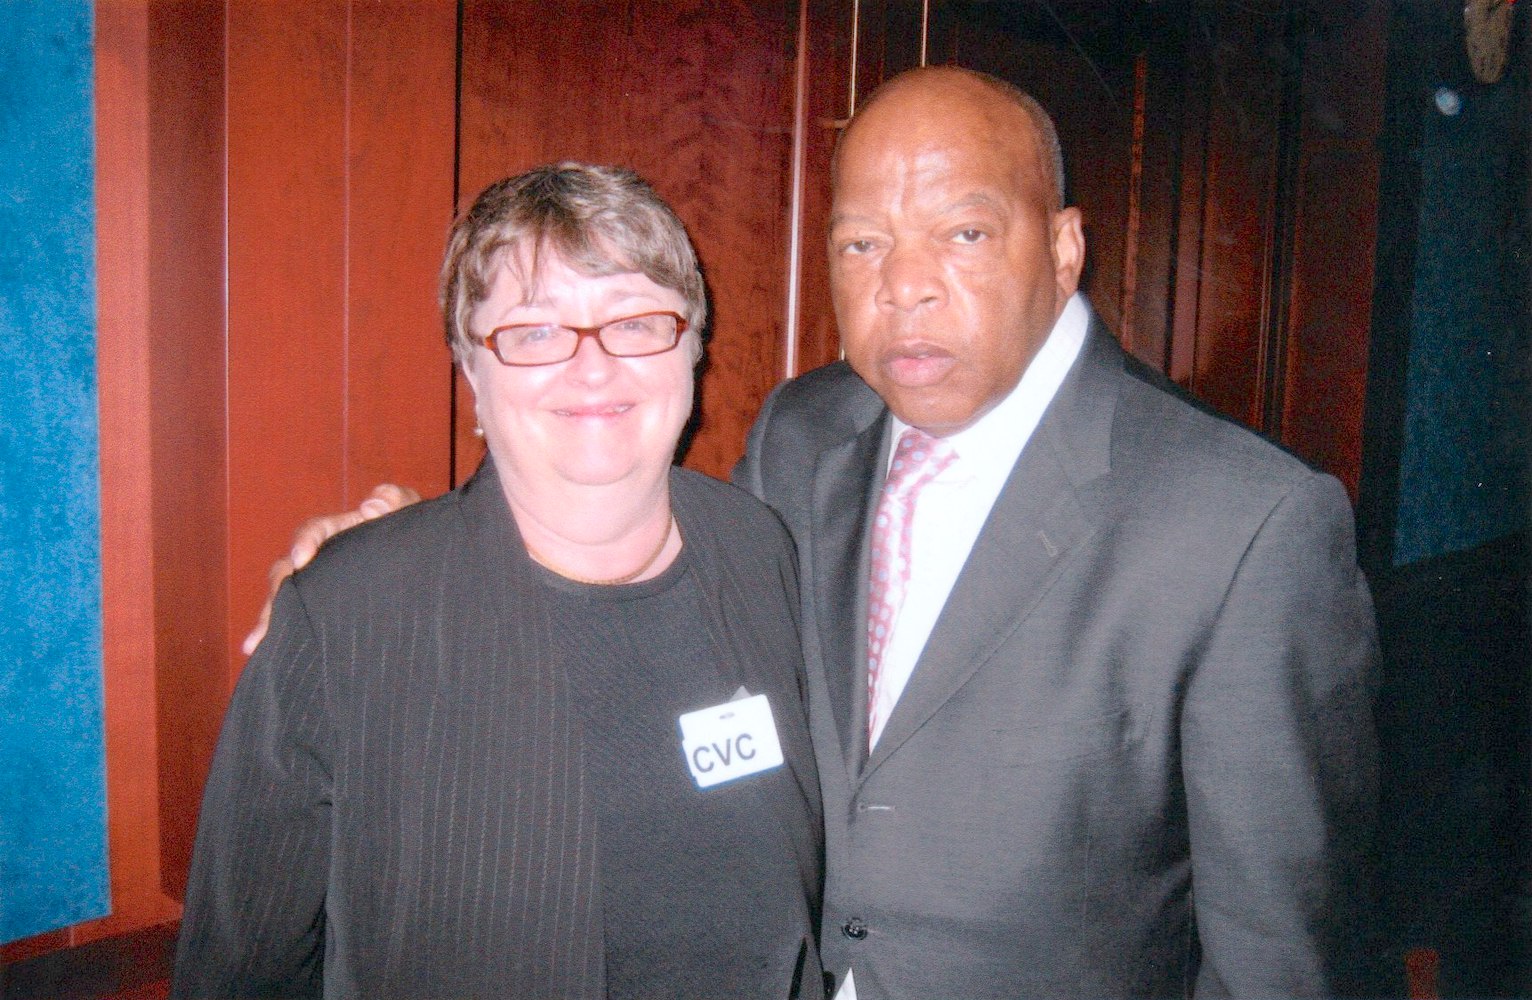 Kathie Hiers with Representative John Lewis, 2009. Photo courtesy of Kathie Hiers.